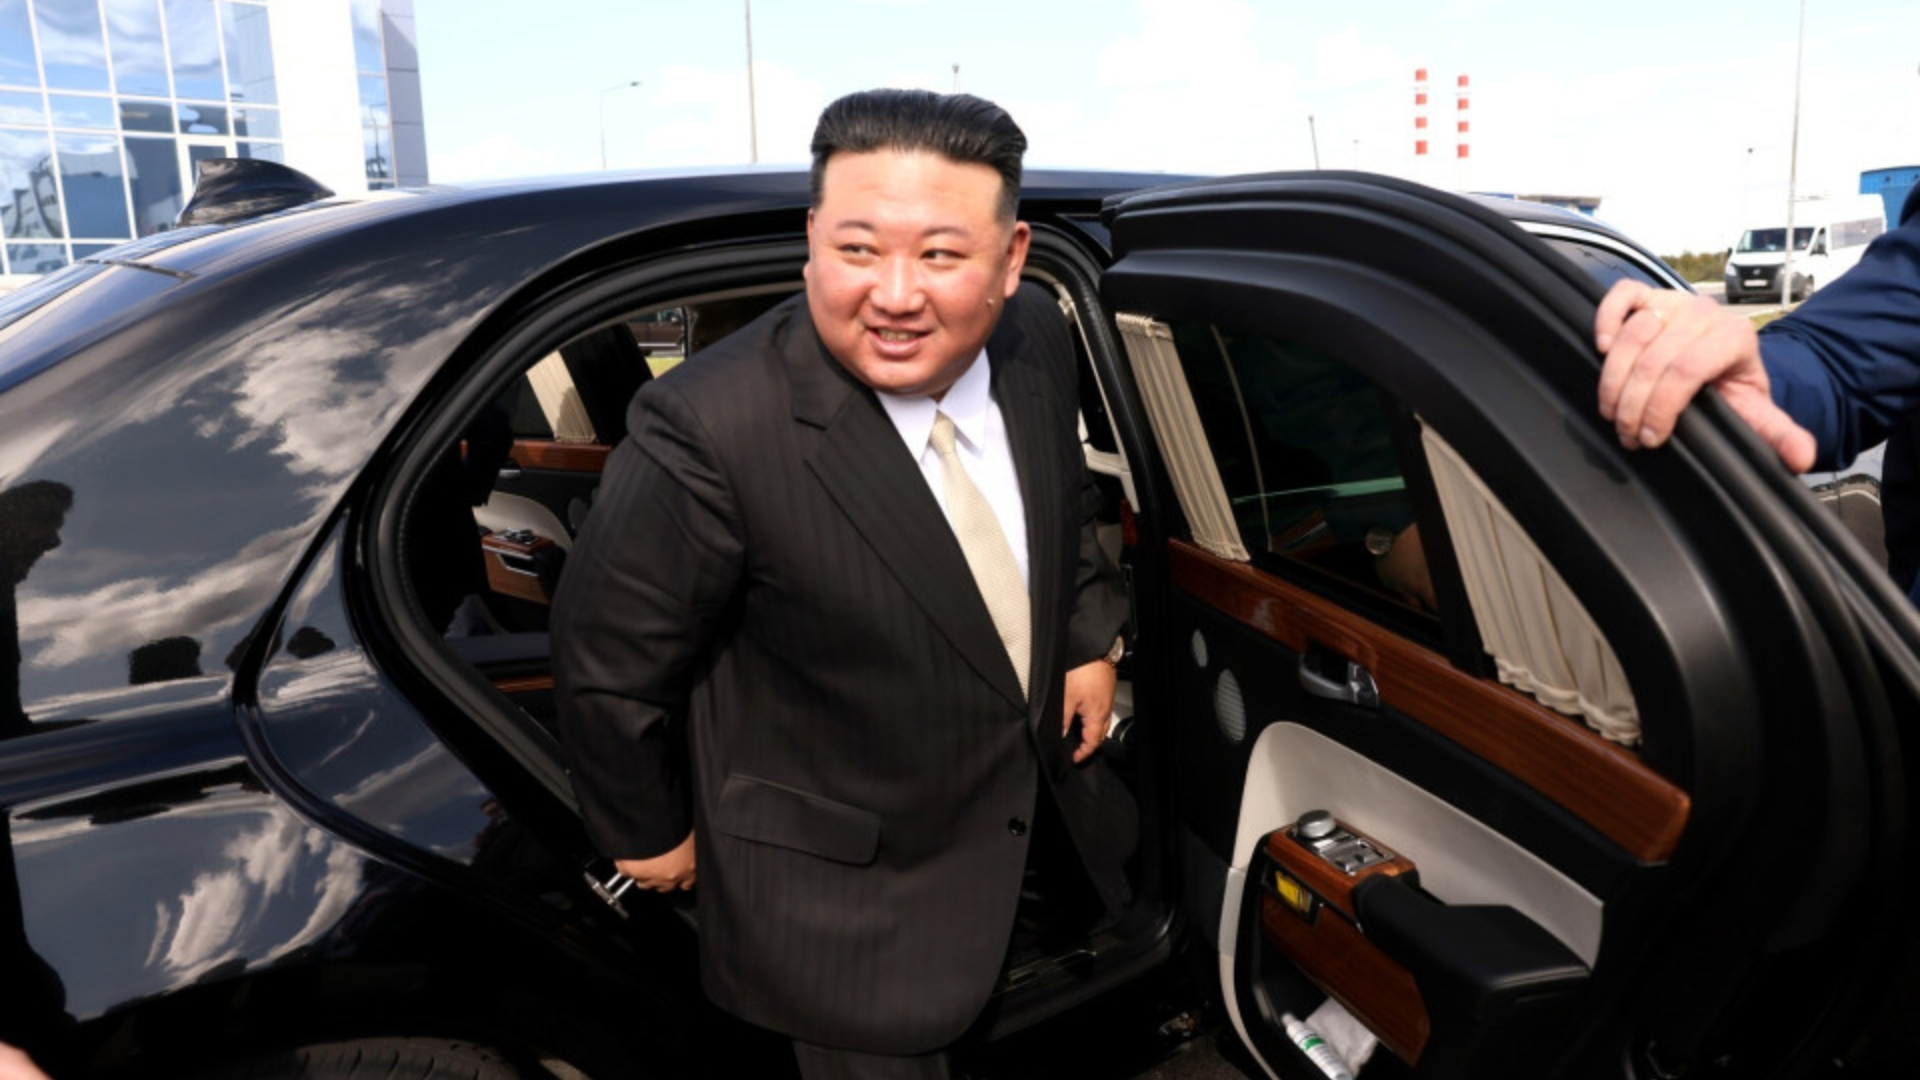 Kim Jong Un Takes First Ride in Luxury Car Gifted by Putin